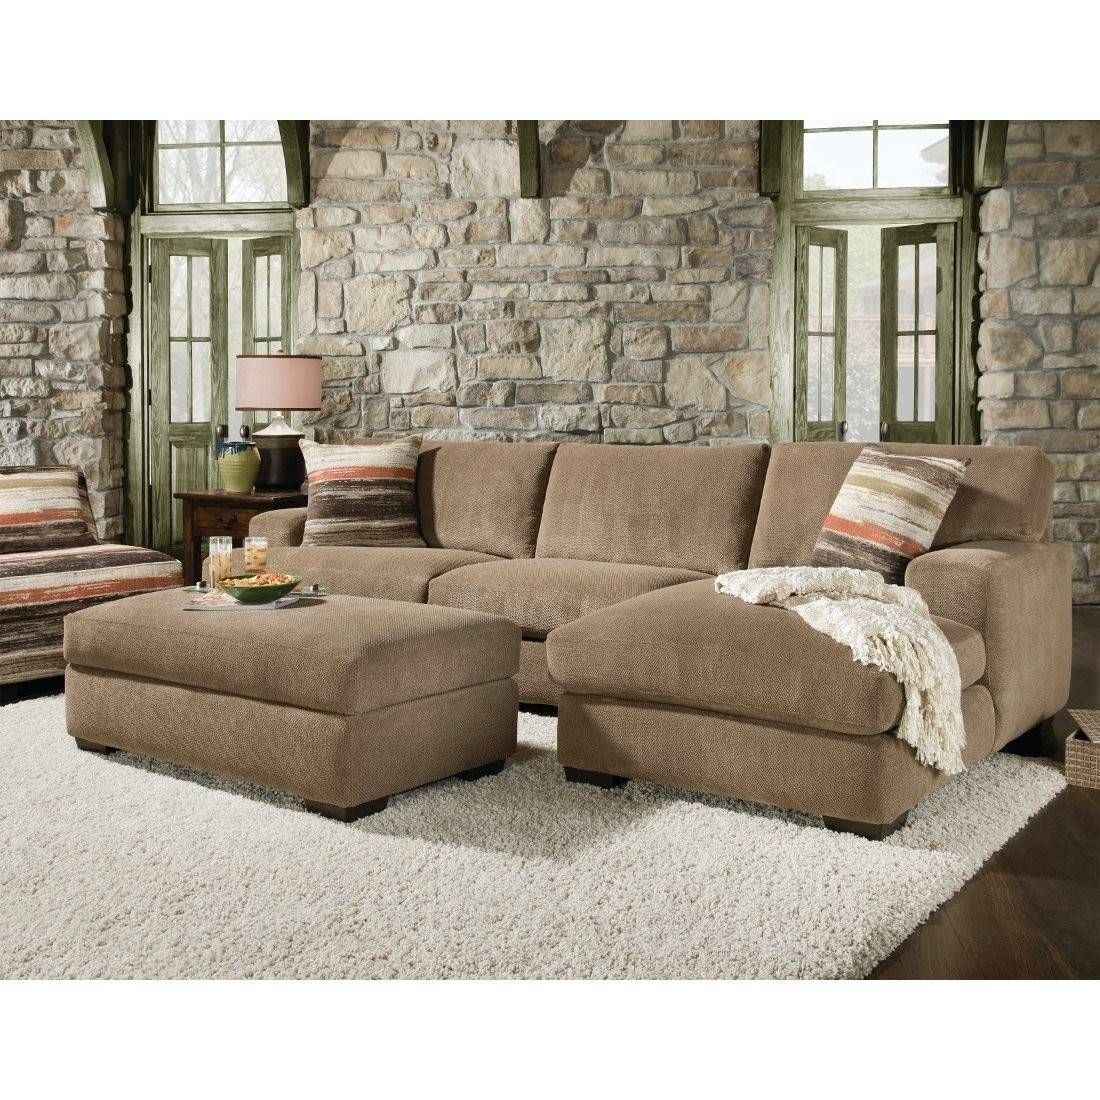 Sofas Center : Sectional Down Filled Sofa Feather Slipcover For Down Filled Sofas And Sectionals (View 1 of 30)